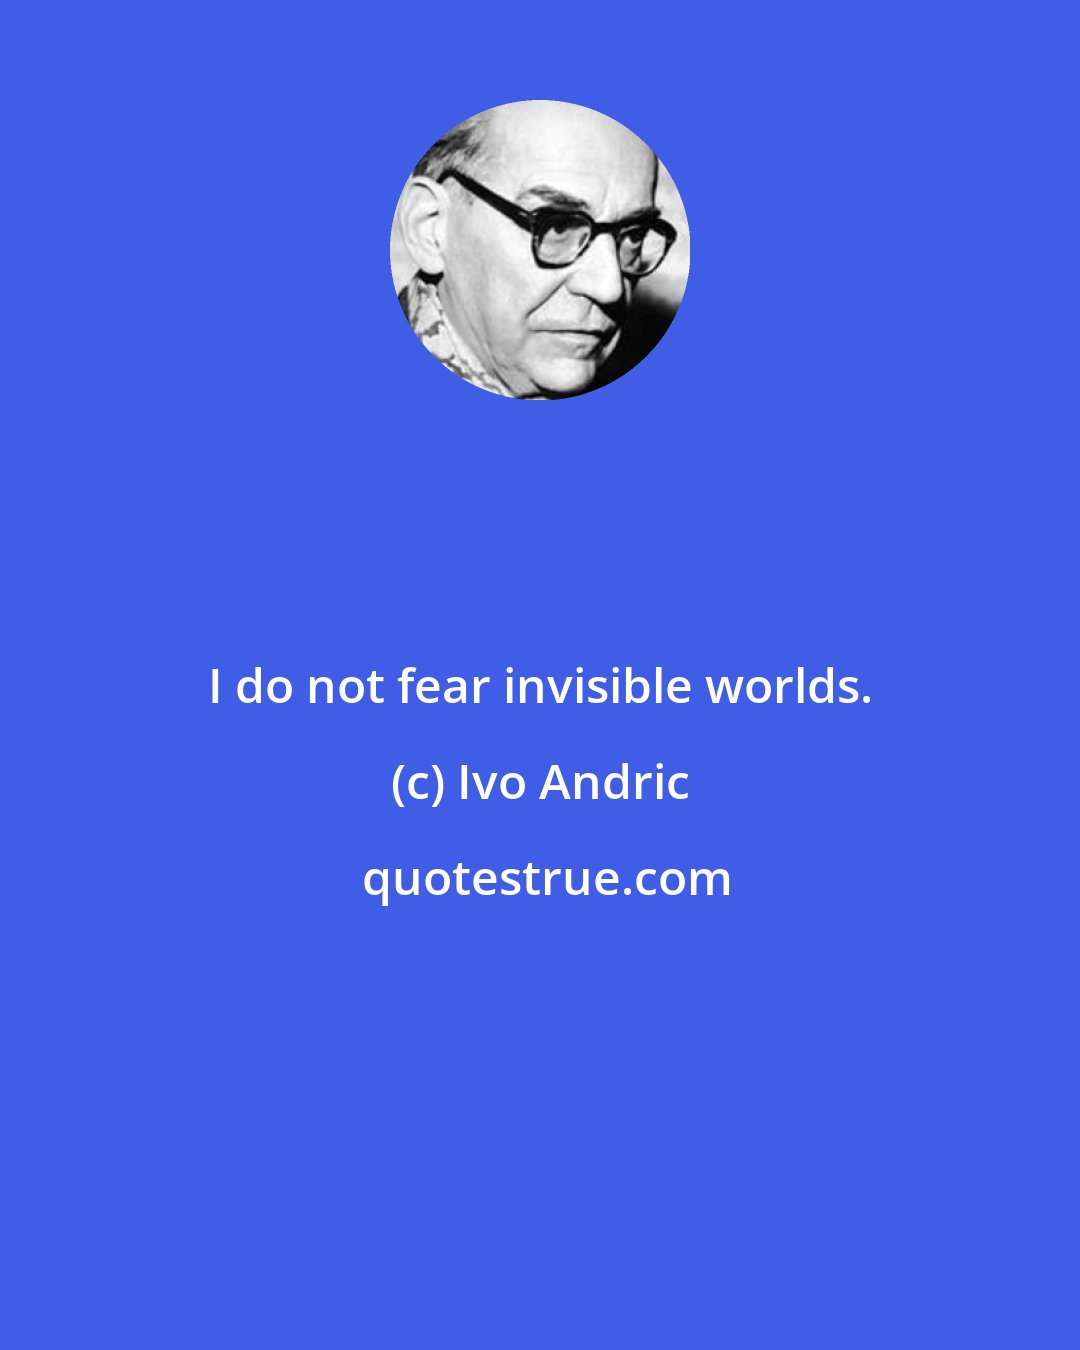 Ivo Andric: I do not fear invisible worlds.